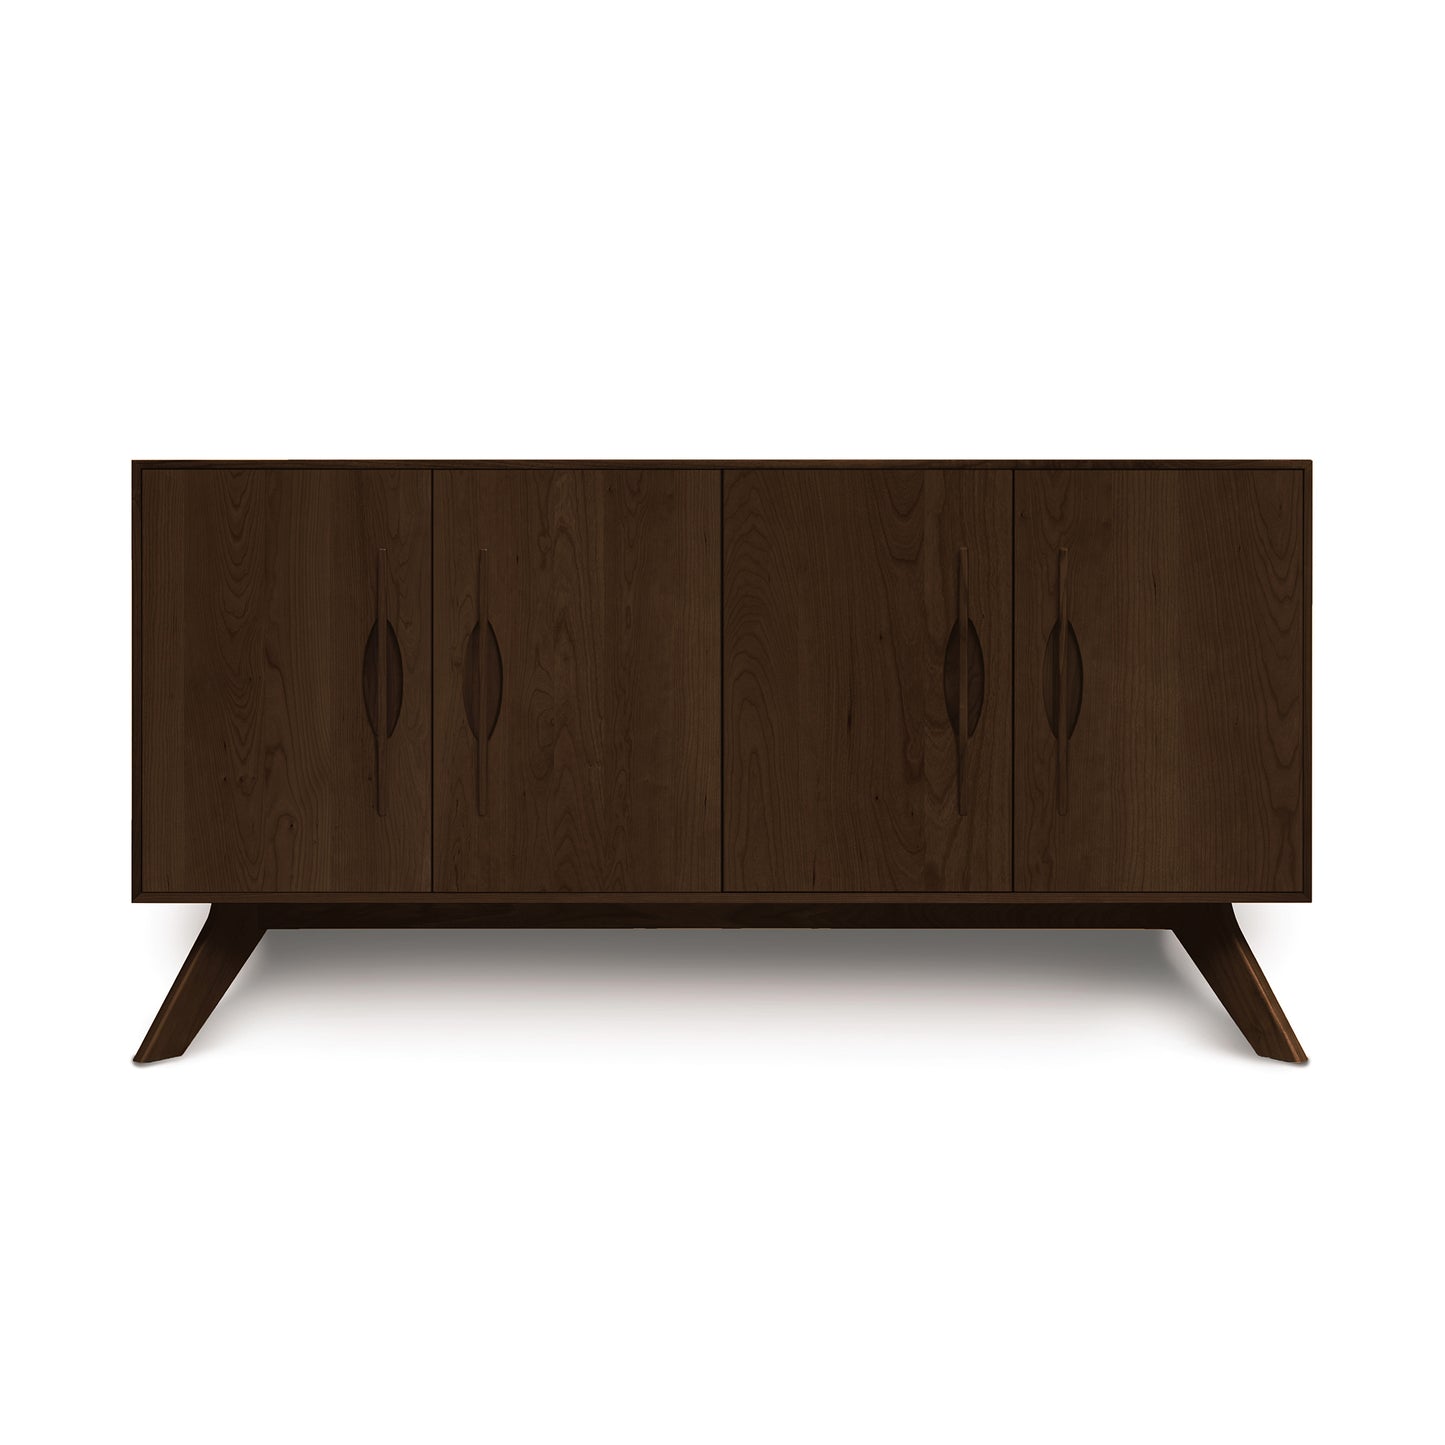 A modern Copeland Furniture Audrey 4-Door Buffet made of solid wood with four doors and angled legs against a white background.